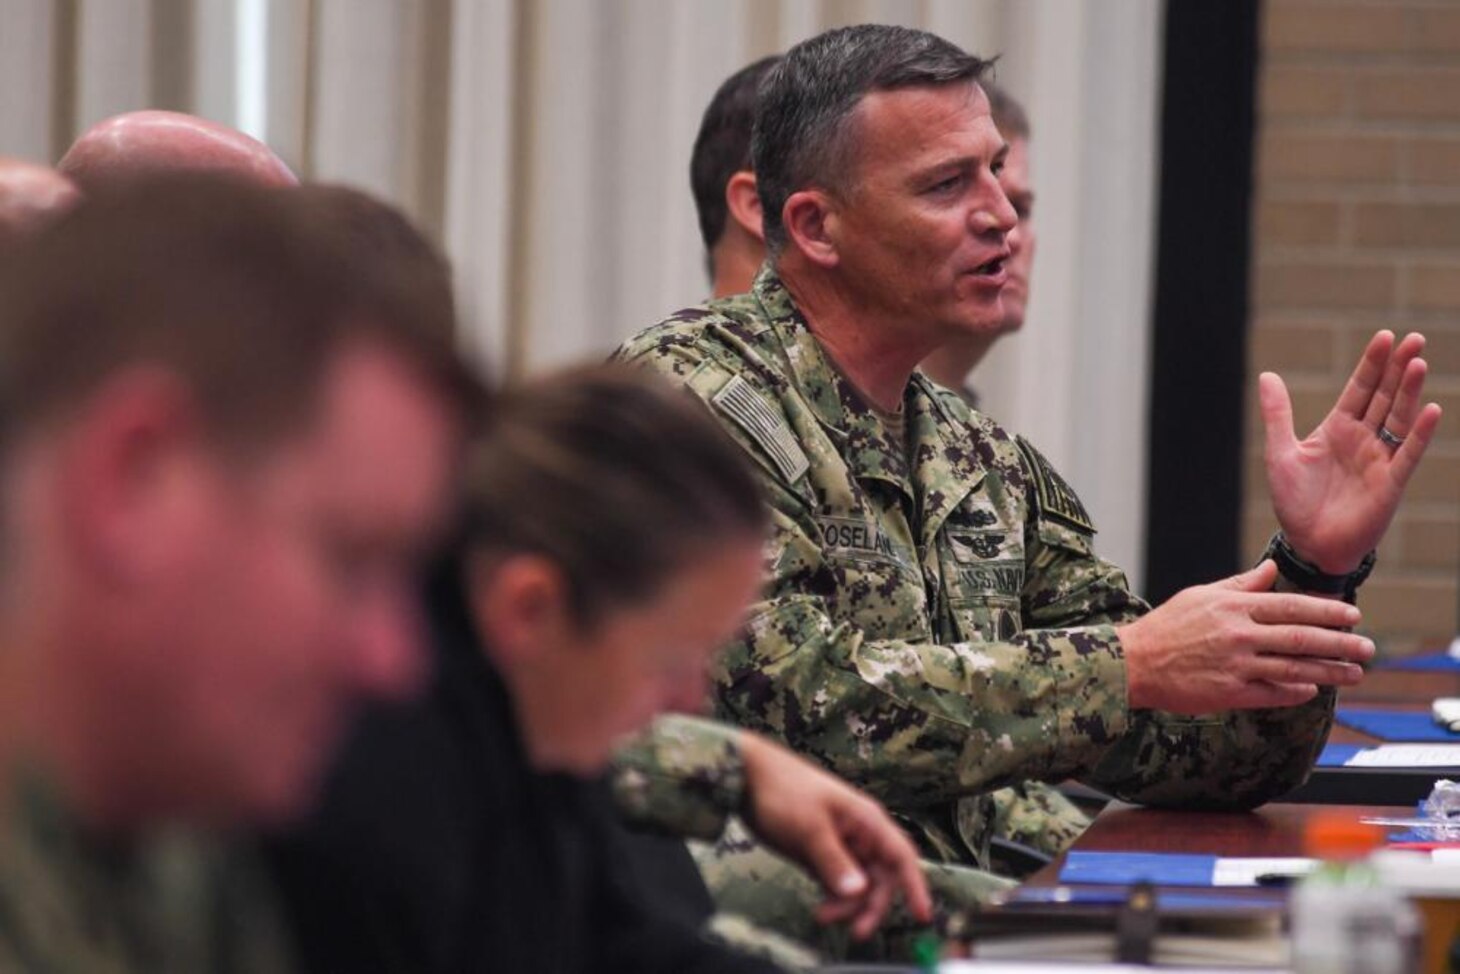 VIRGINIA BEACH, Va. (Oct. 17, 2022) Command Master Chiefs Patrick Roseland, command master chief, Destroyer Squadron 22, asks a question during Naval Surface Force Atlantic (SURFLANT) Commander’s Training Symposium (CTS) 22-2, Oct. 18. CTS is a bi-annual, two-day leadership training event for flag officers, commanding officers, and command senior enlisted leaders across the SURFLANT clamancy. (U.S. Navy photo by Mass Communication Specialist 1st Class Jacob Milham)